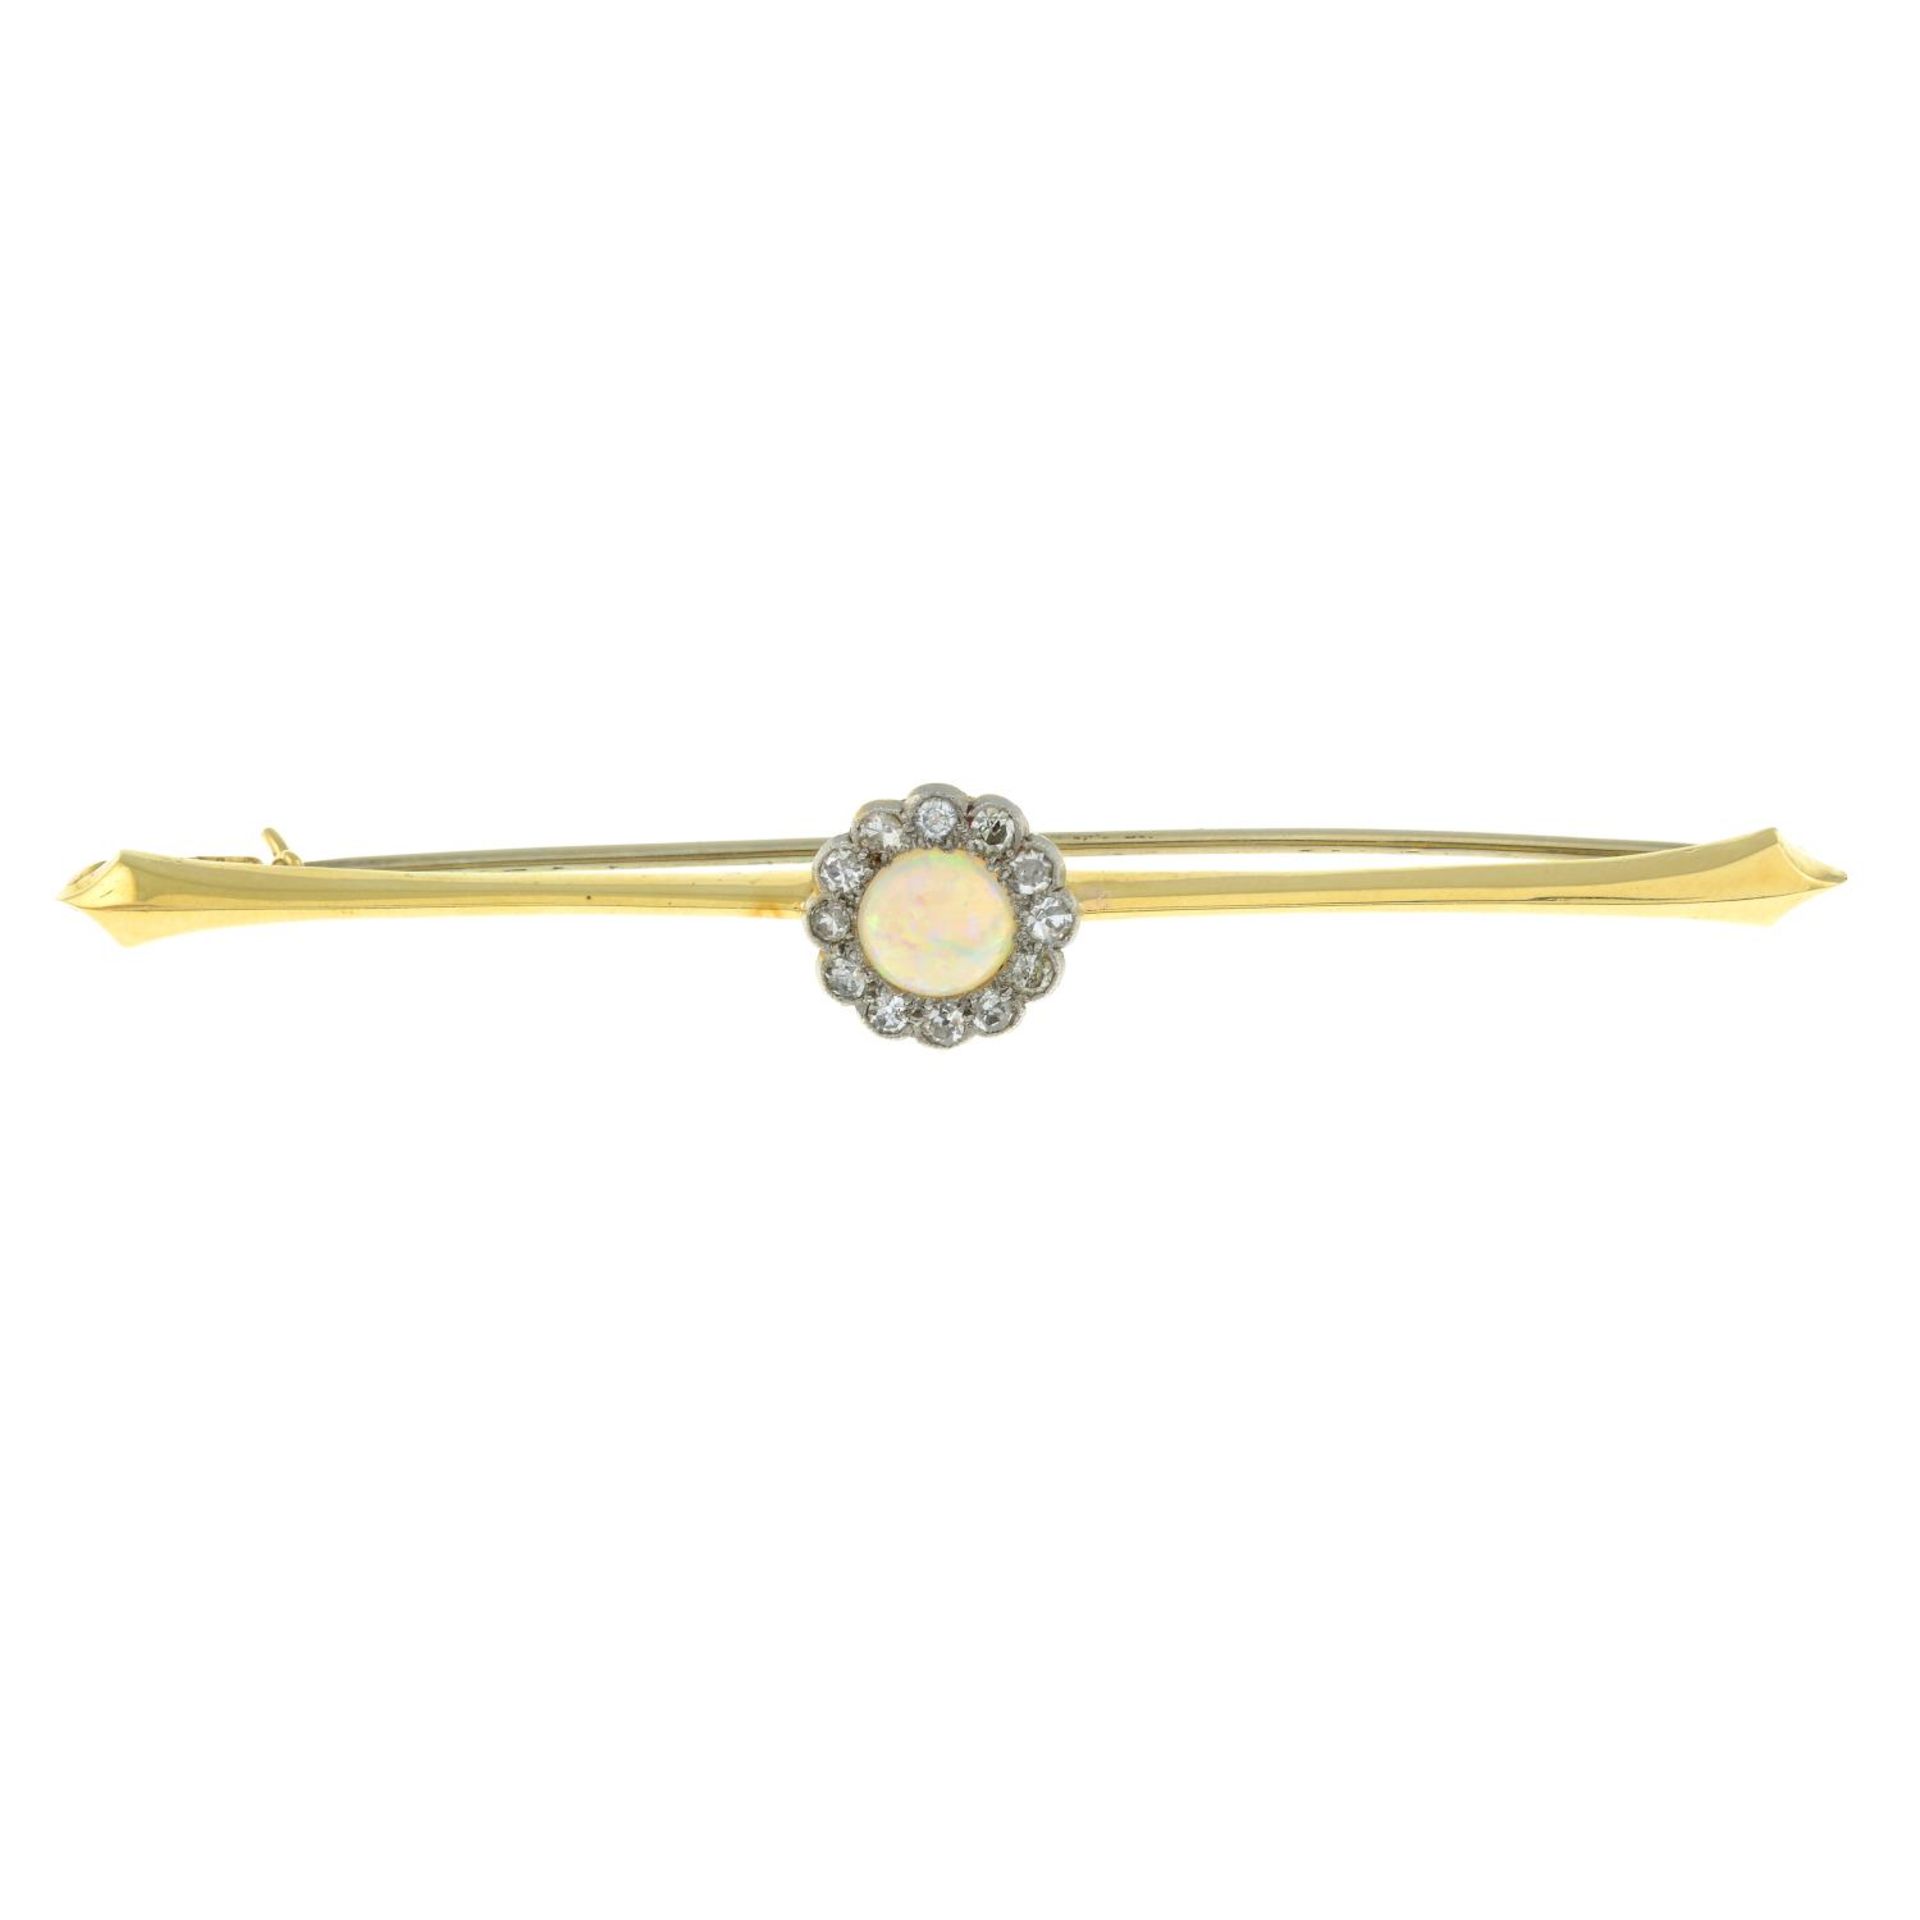 An early 20th century opal and diamond cluster bar brooch.Estimated total diamond weight 0.35ct.